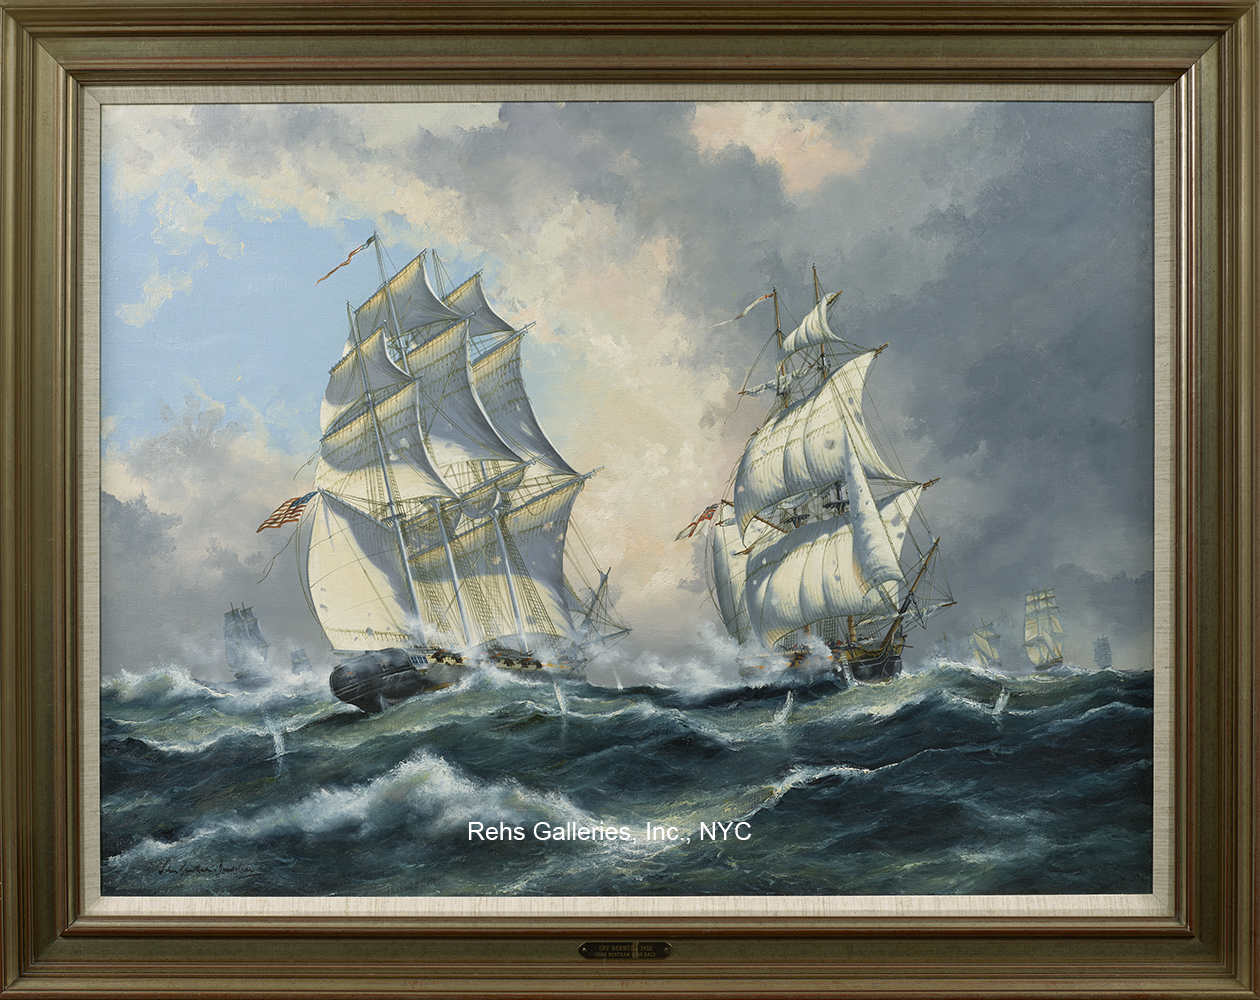 The HMS Frolic and USS Wasp, October 18, 1812 - John Bentham-Dinsdale